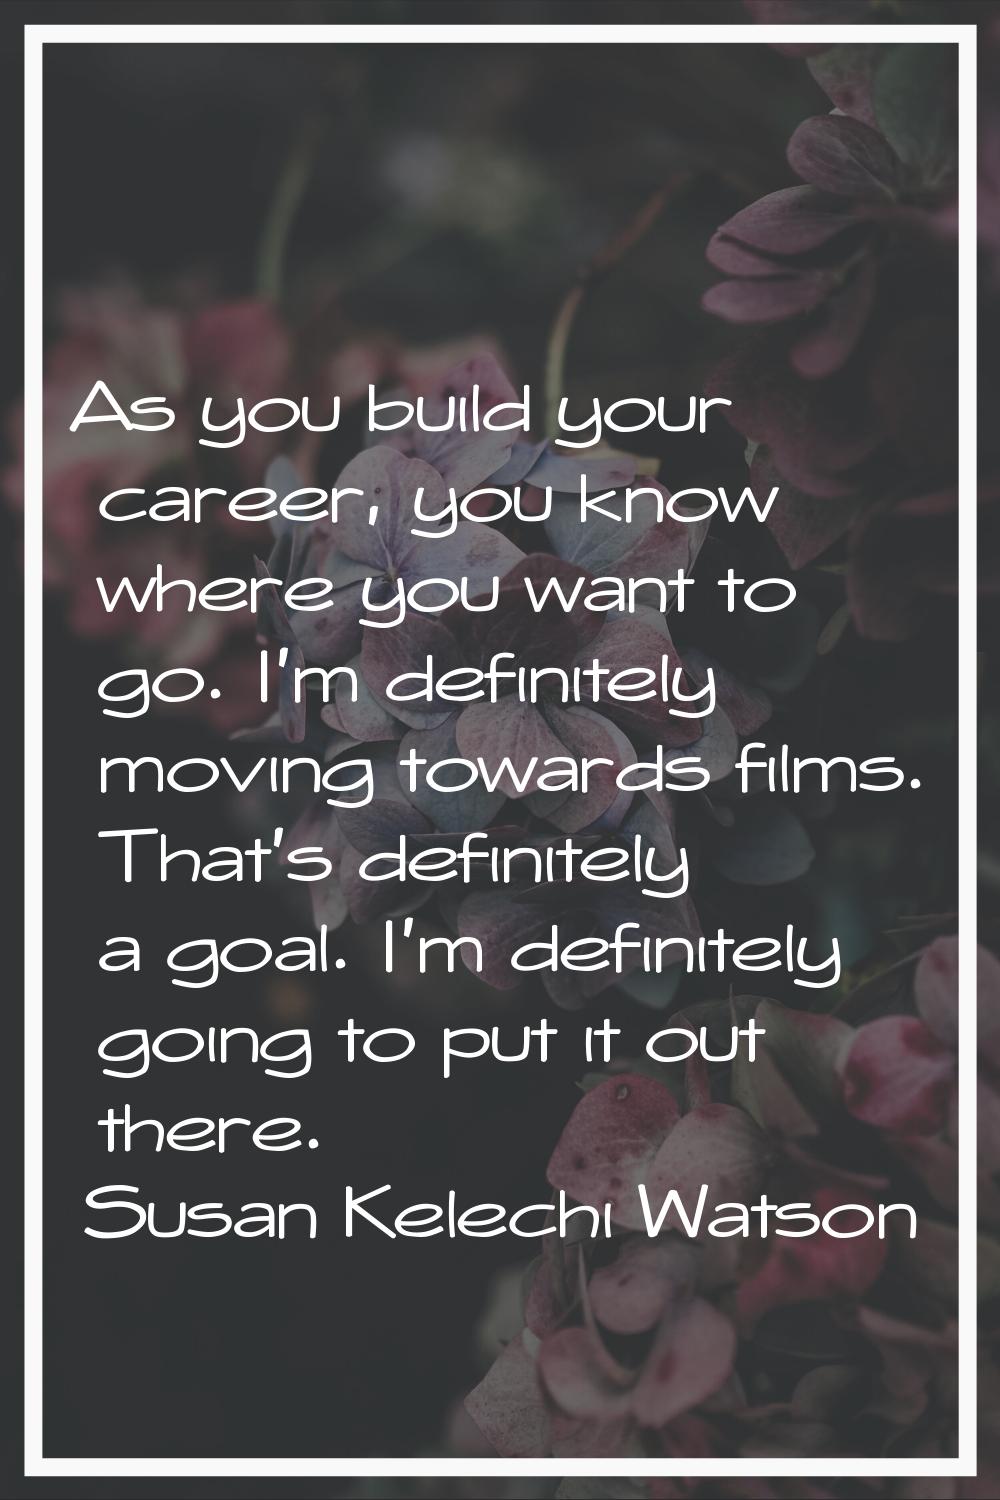 As you build your career, you know where you want to go. I'm definitely moving towards films. That'